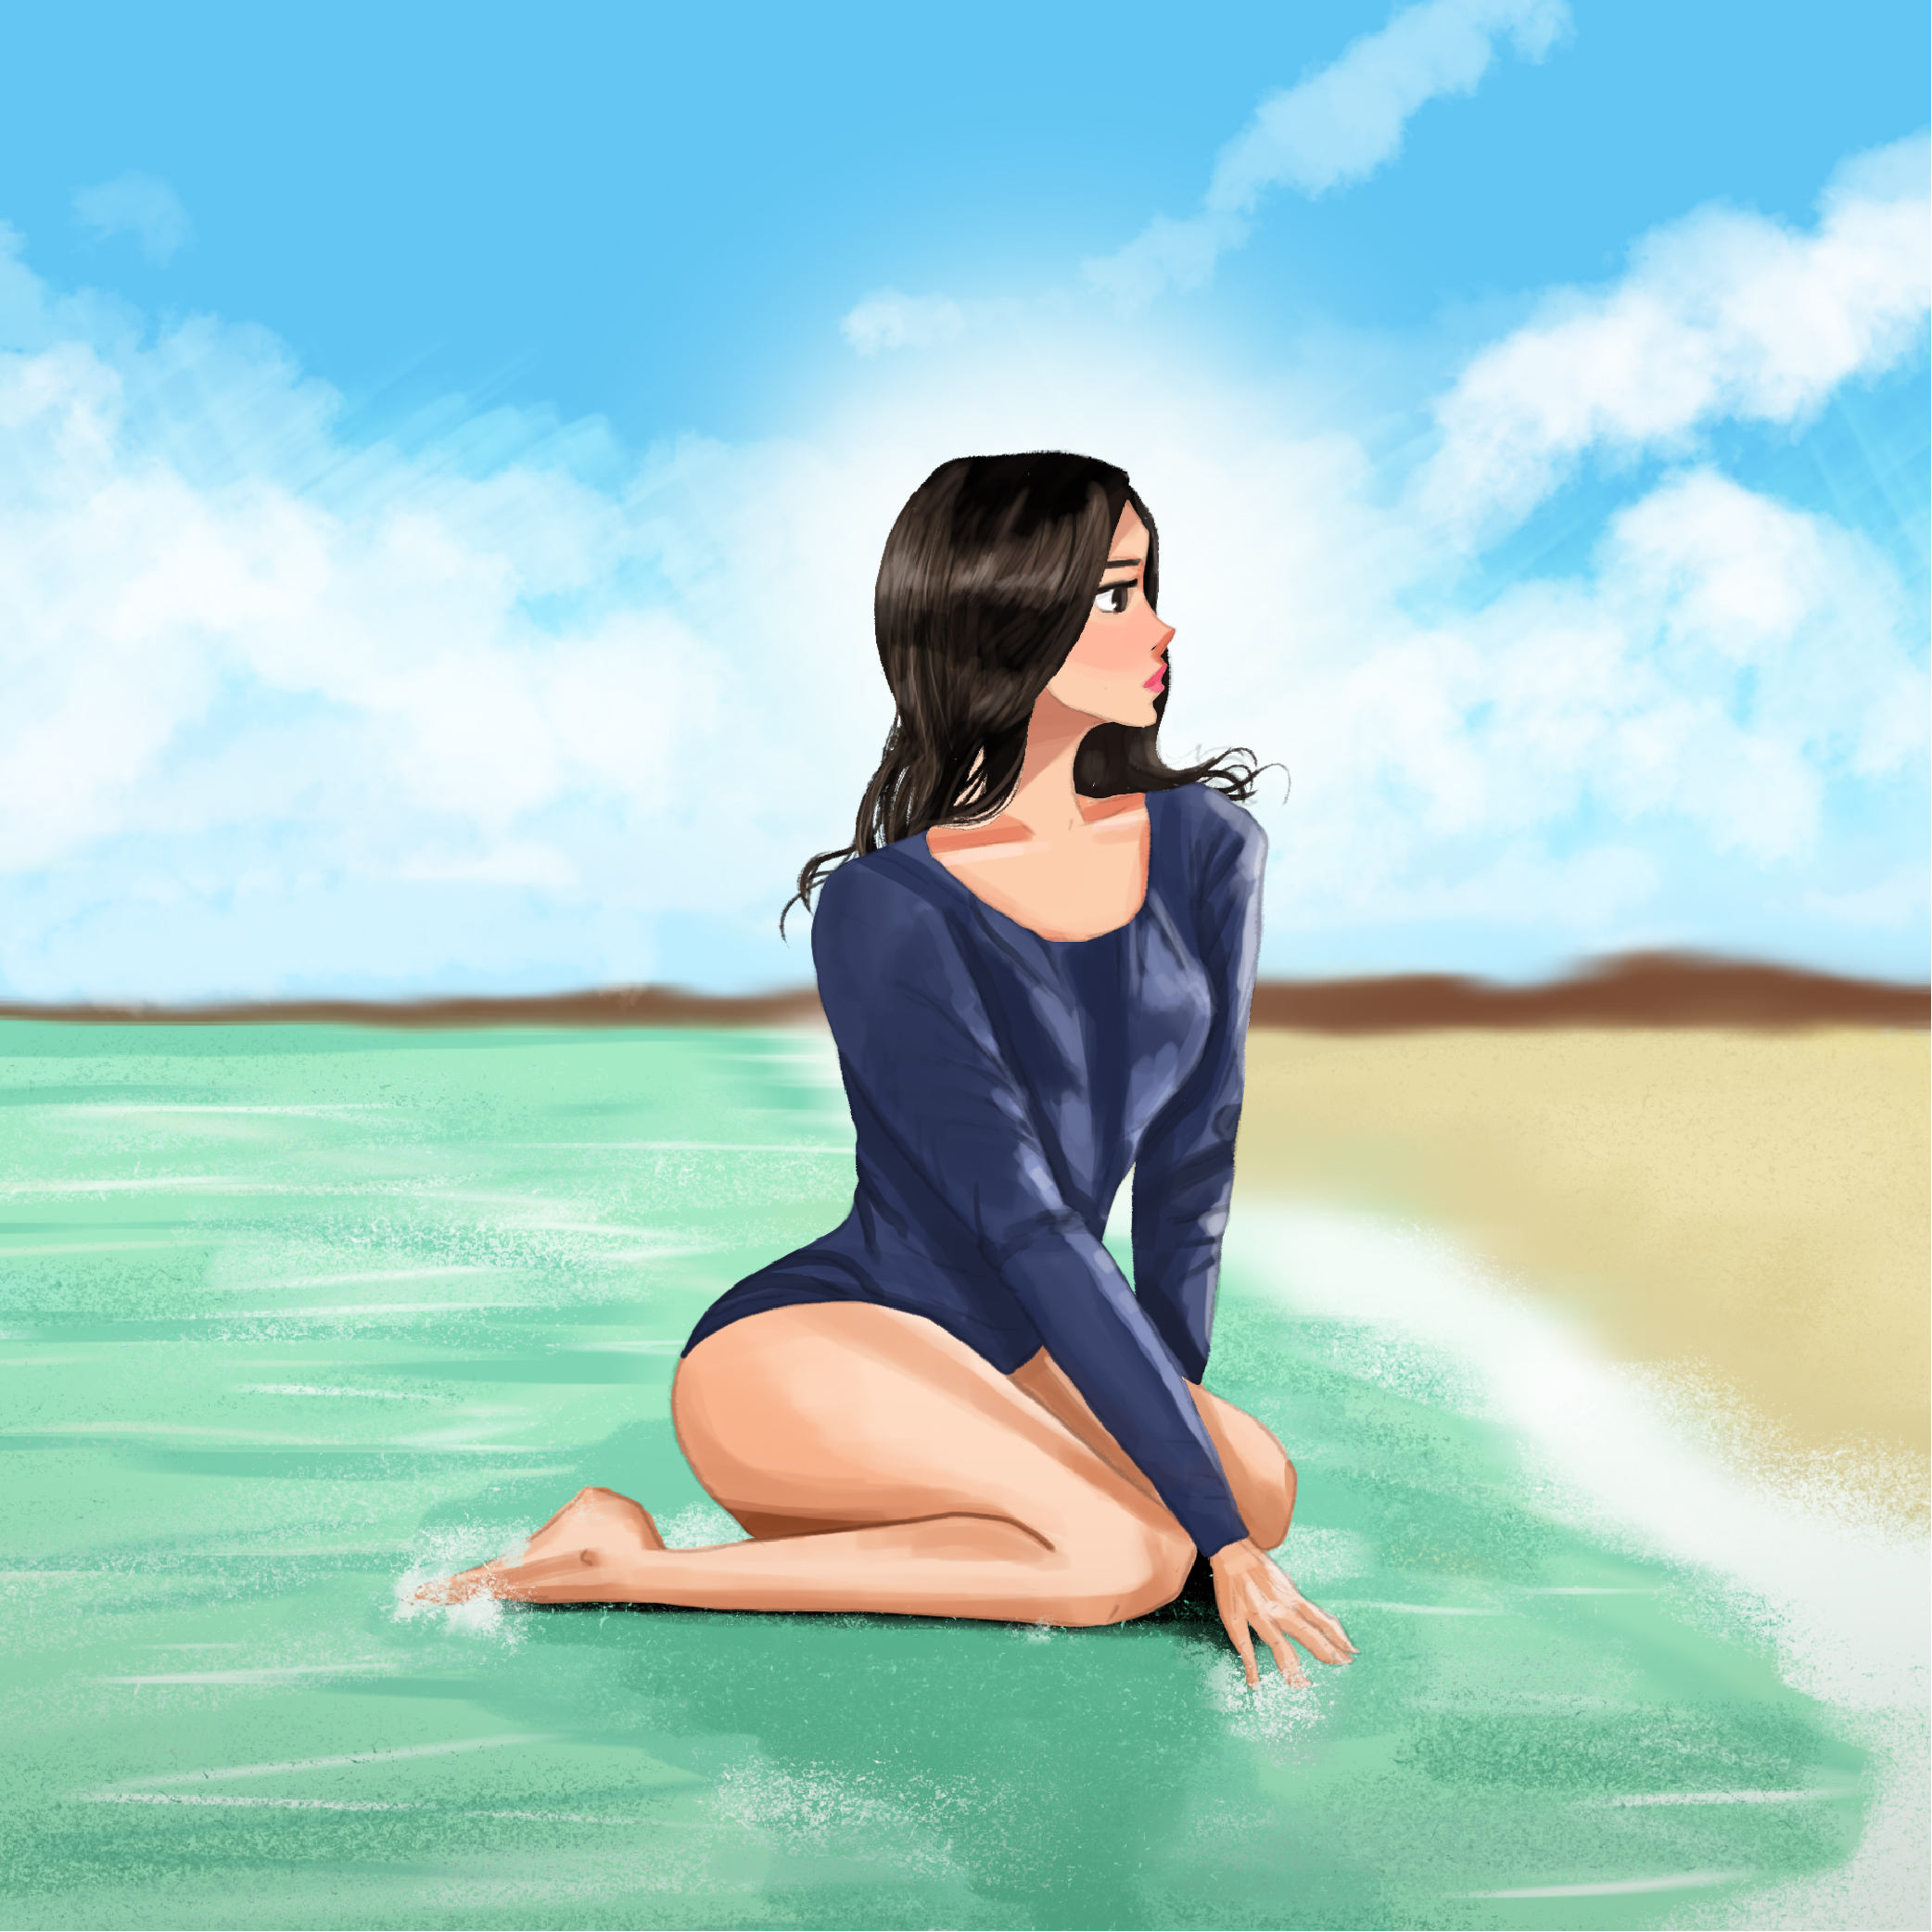 painting-02